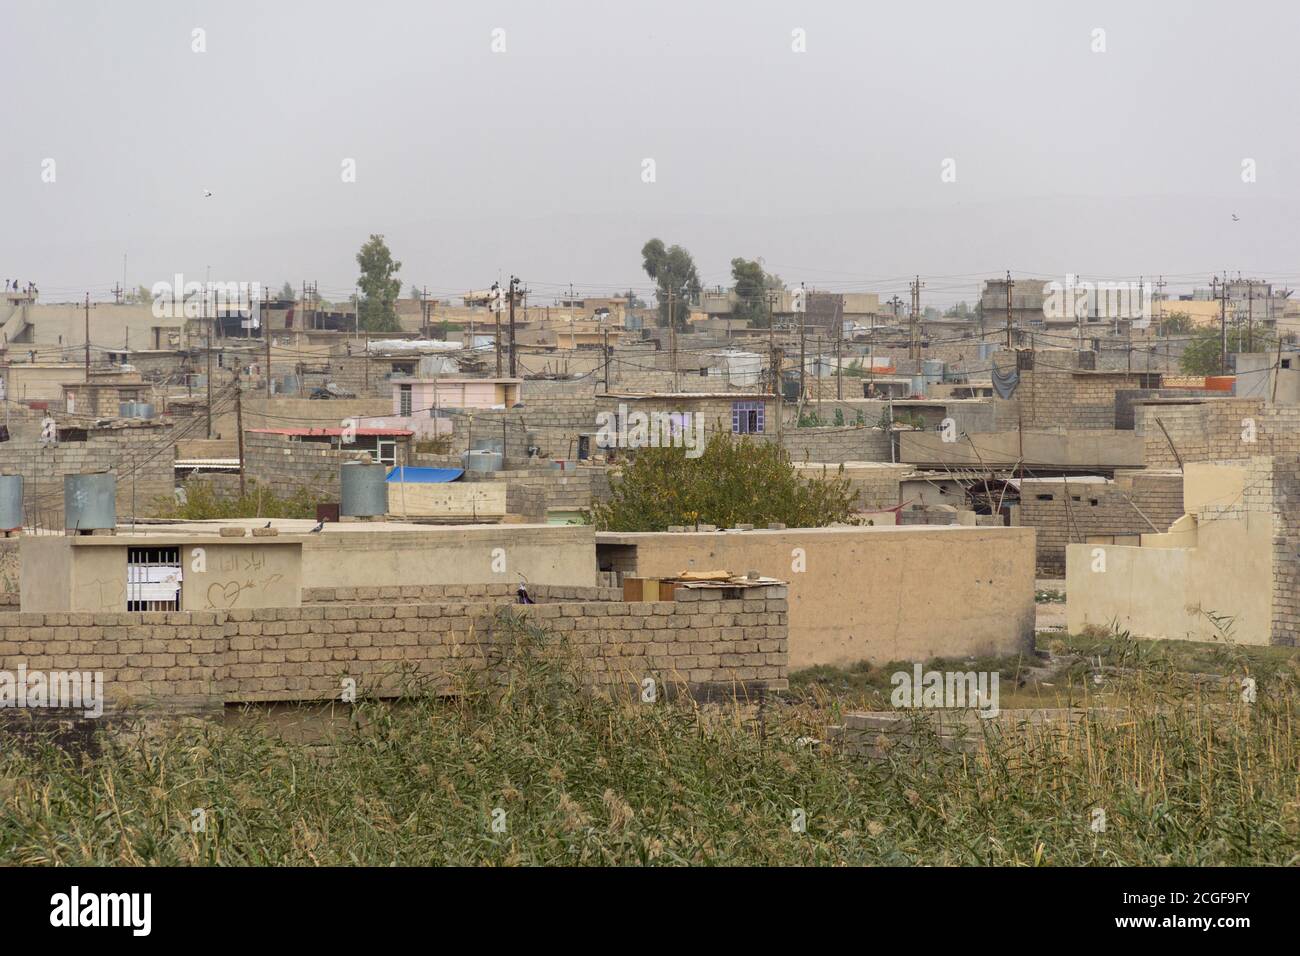 Al Bakir district of East Mosul, Iraq. Taken during the early days of the Mosul Operation of 2016-2017. Stock Photo